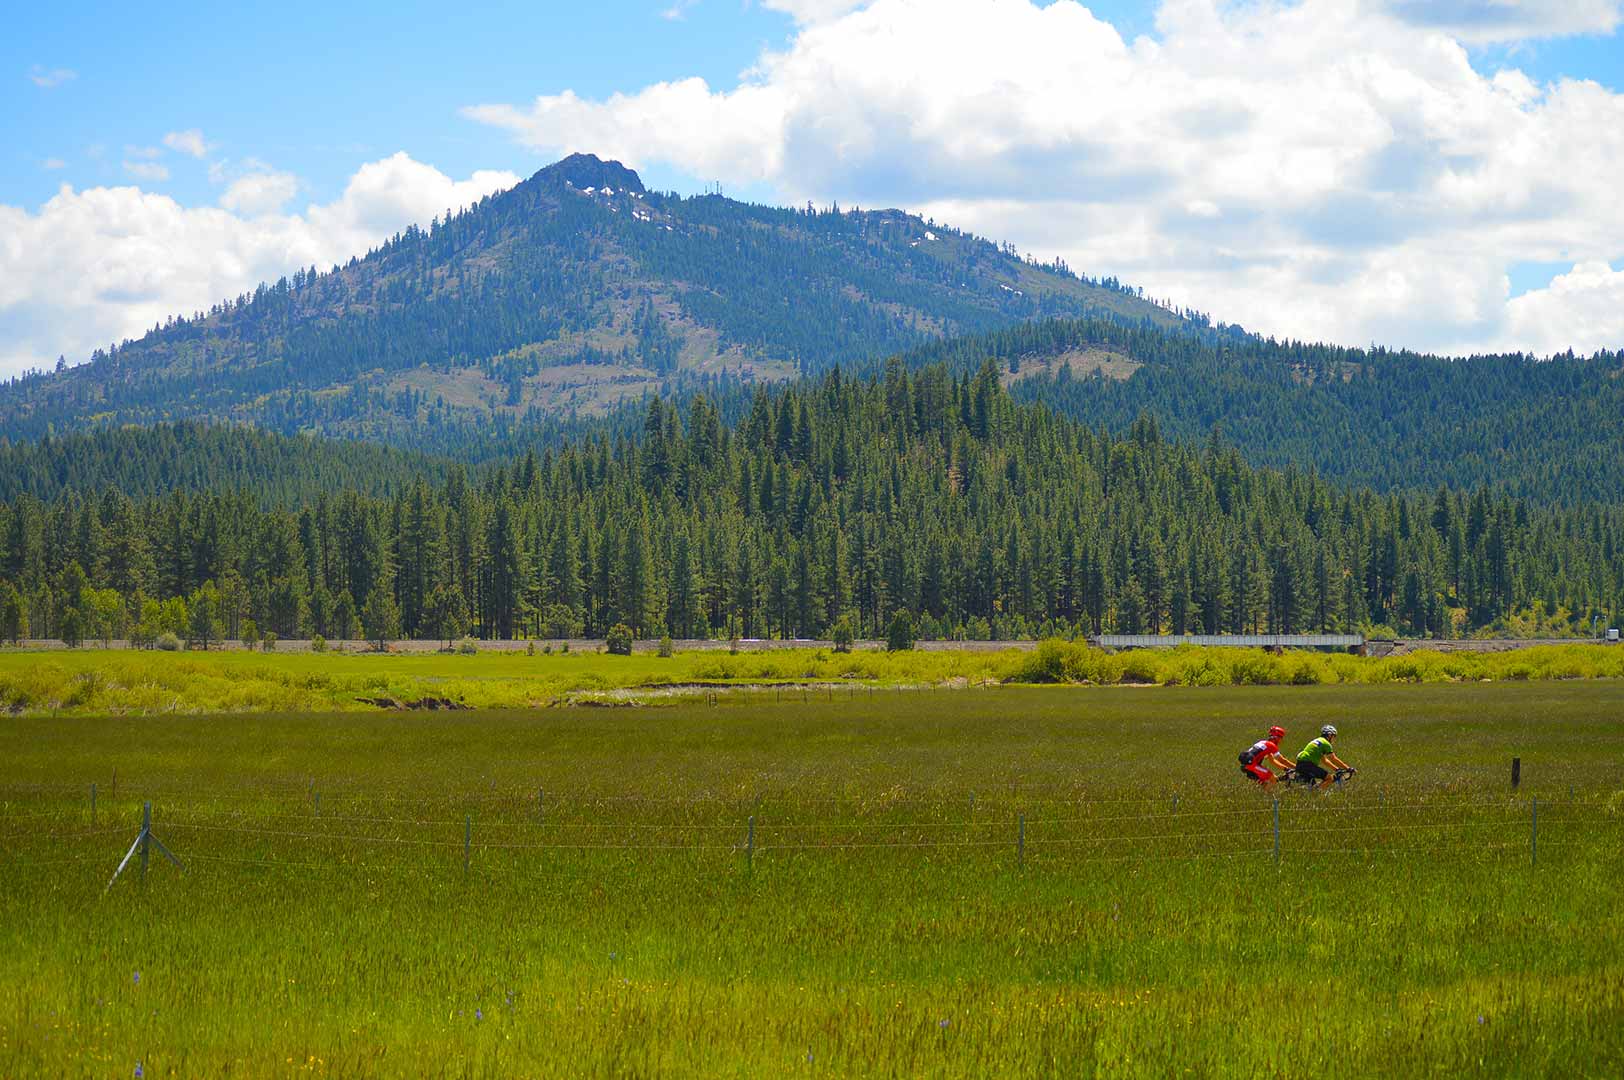 Riders riding in grass with mountains in the background